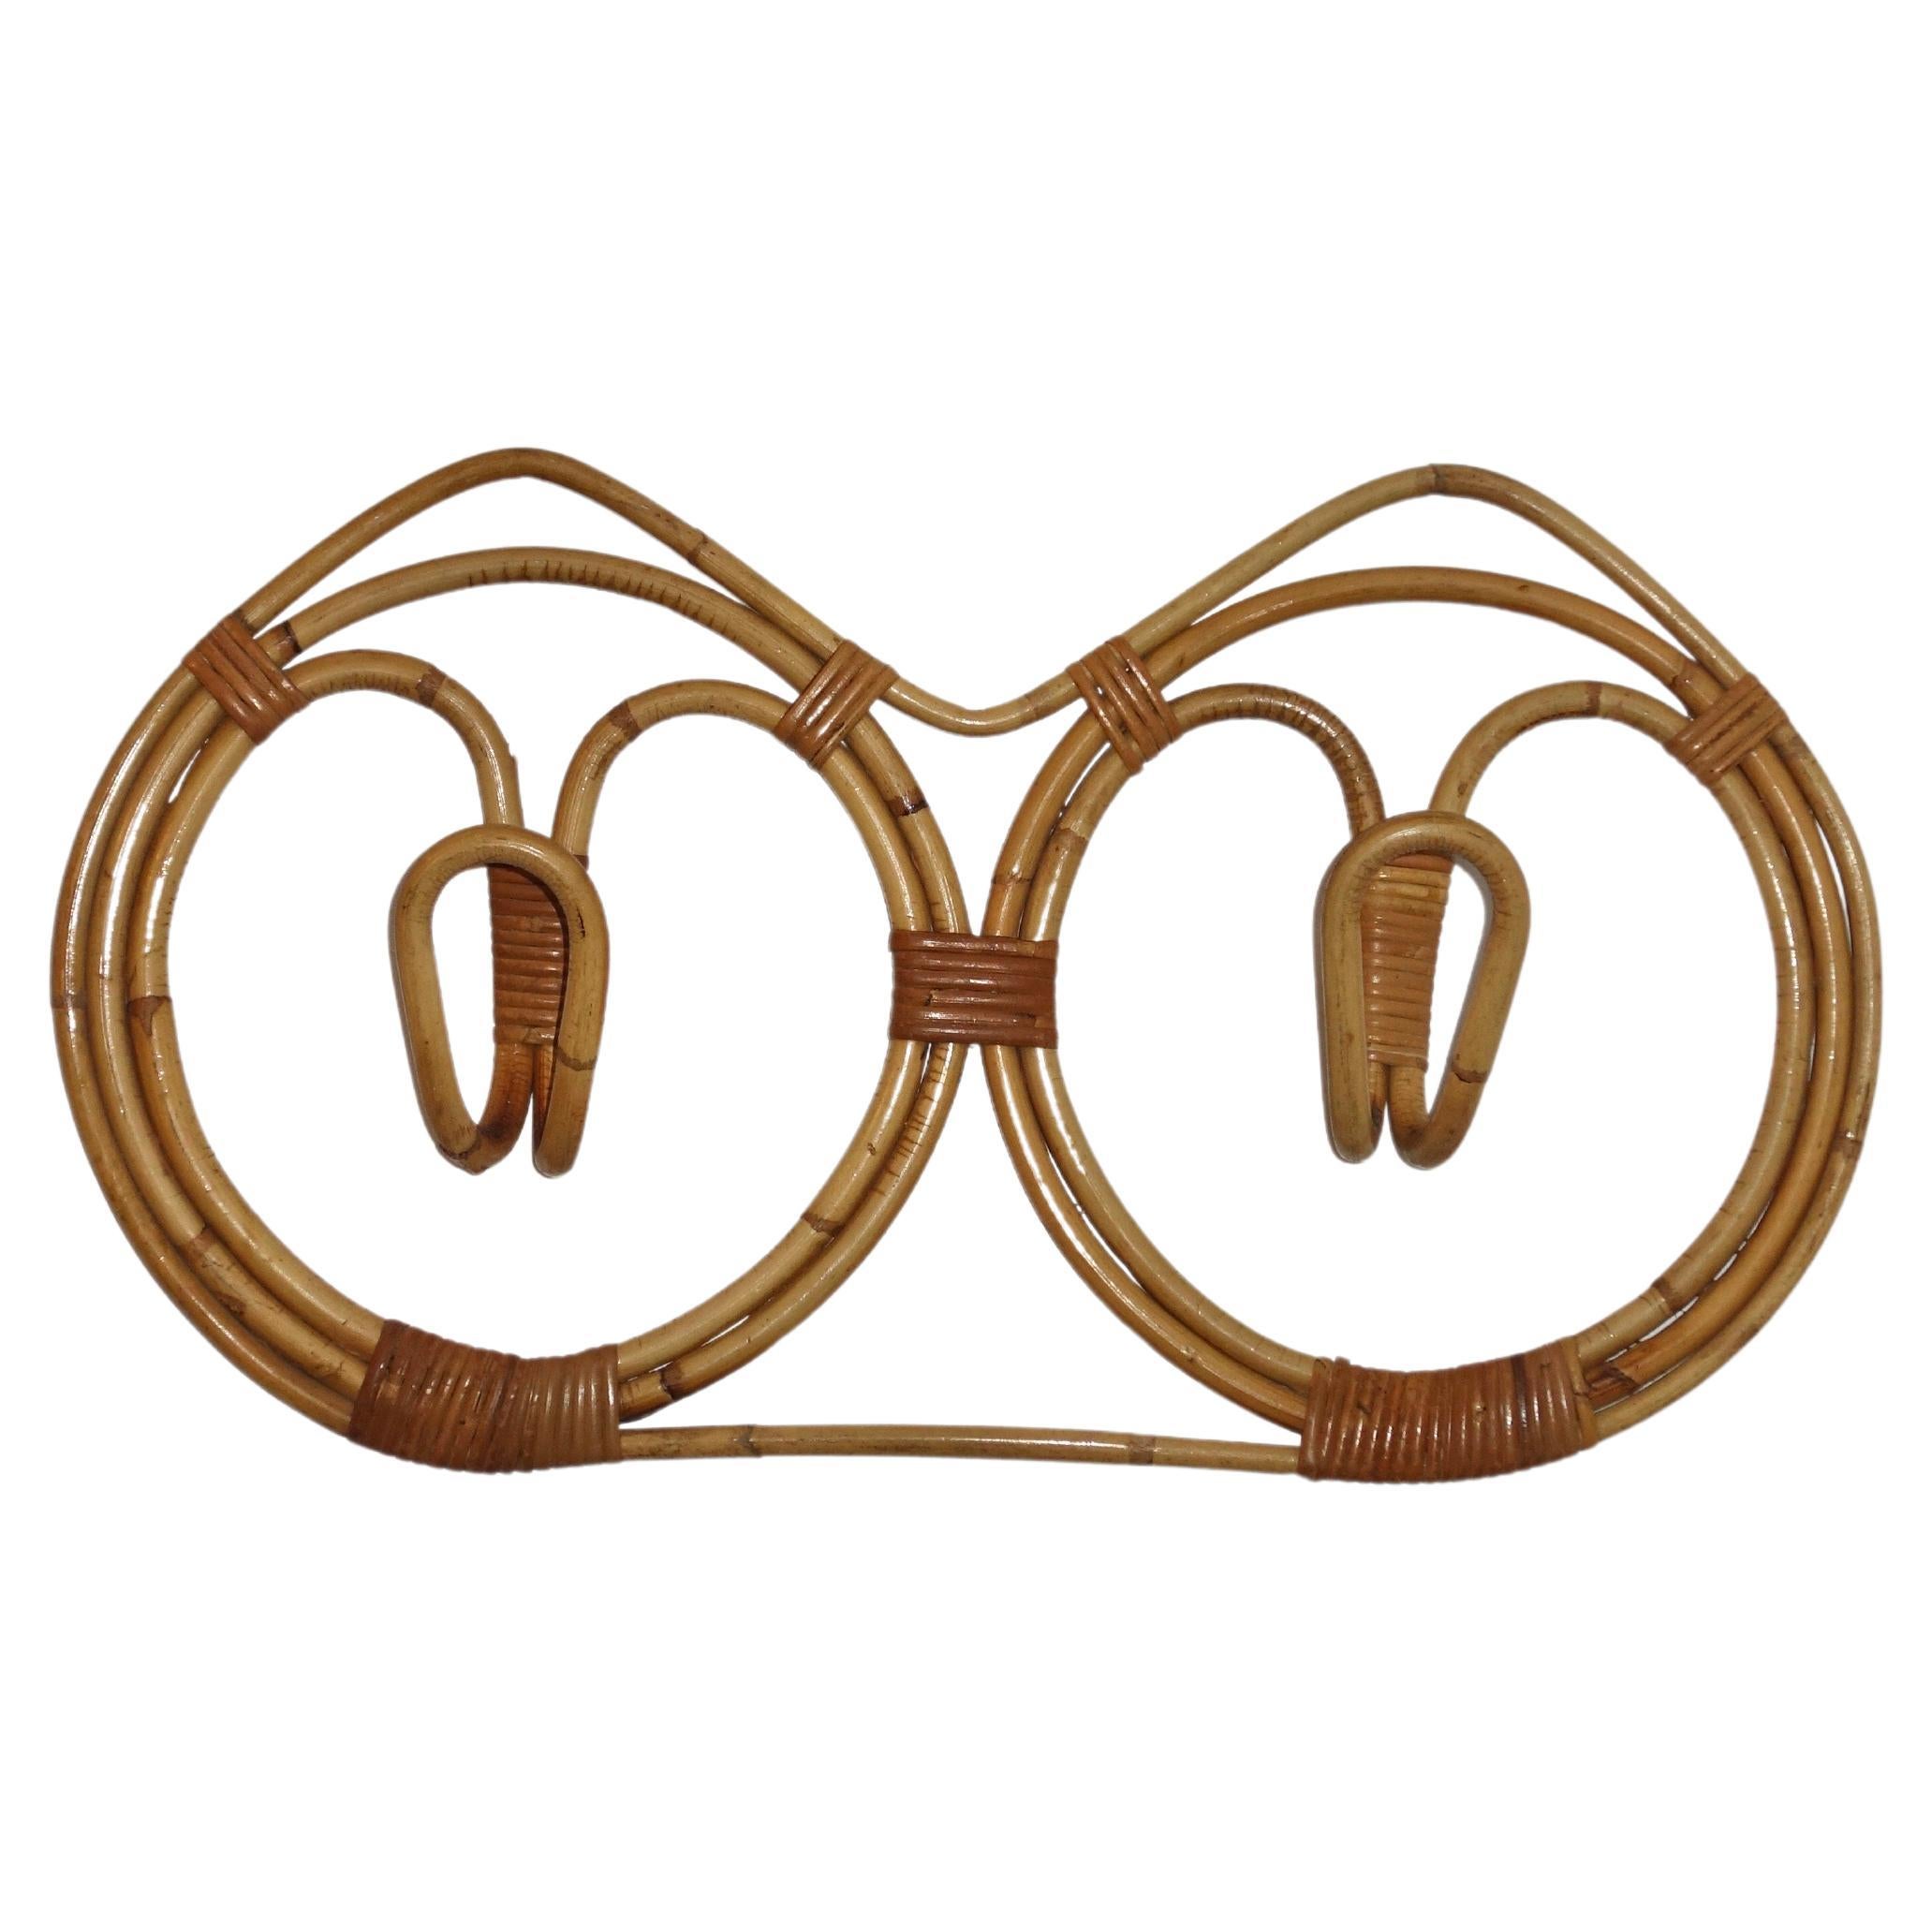 Italian Wall Coat Rack by Franco Albini Rattan and Bamboo 1960's For Sale